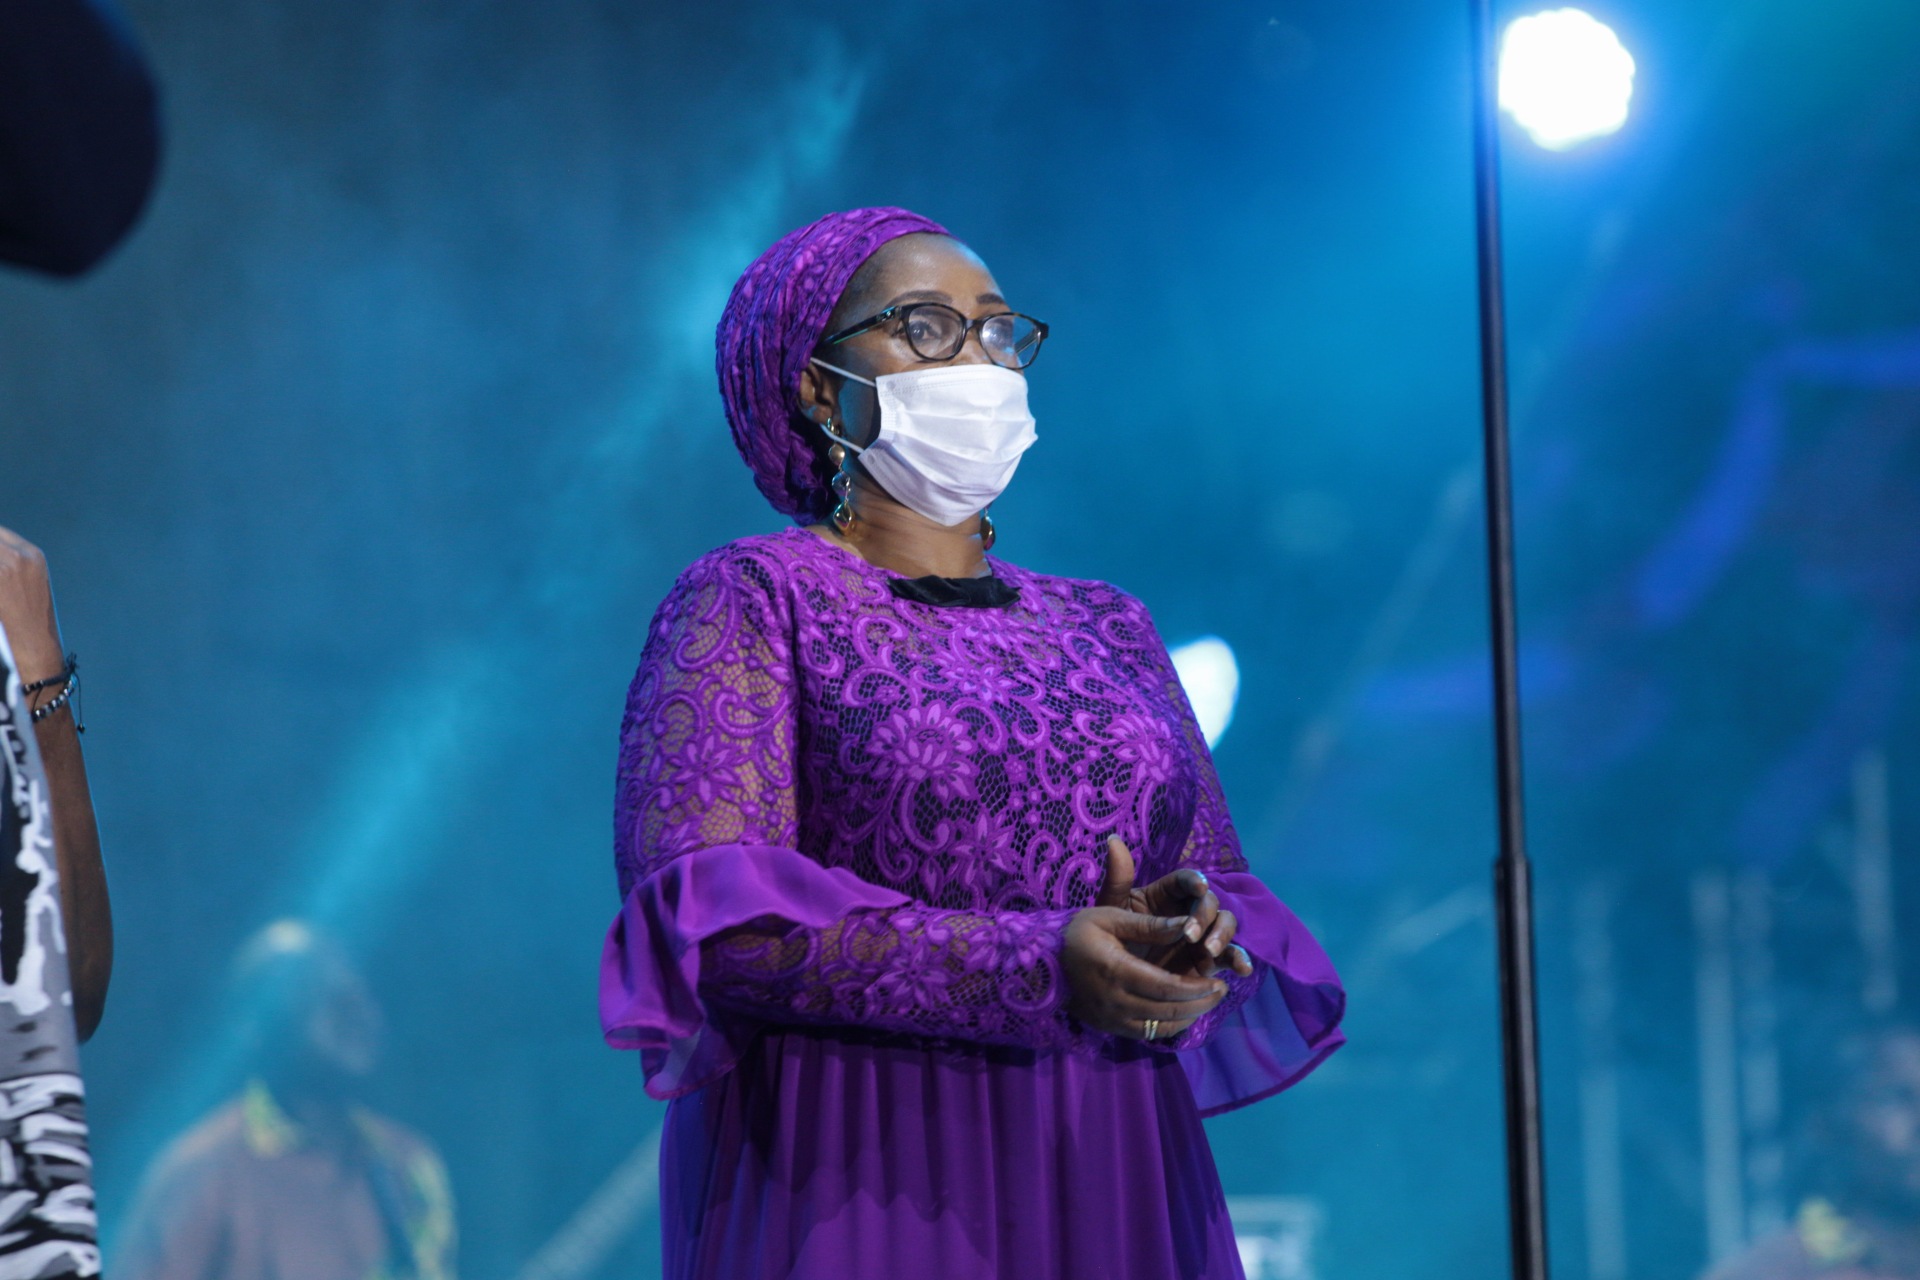 The honourable commissioner, Lagos State Ministry of Tourism, Arts and Culture, (Mrs.) Uzamat Akinbile-Yusuf